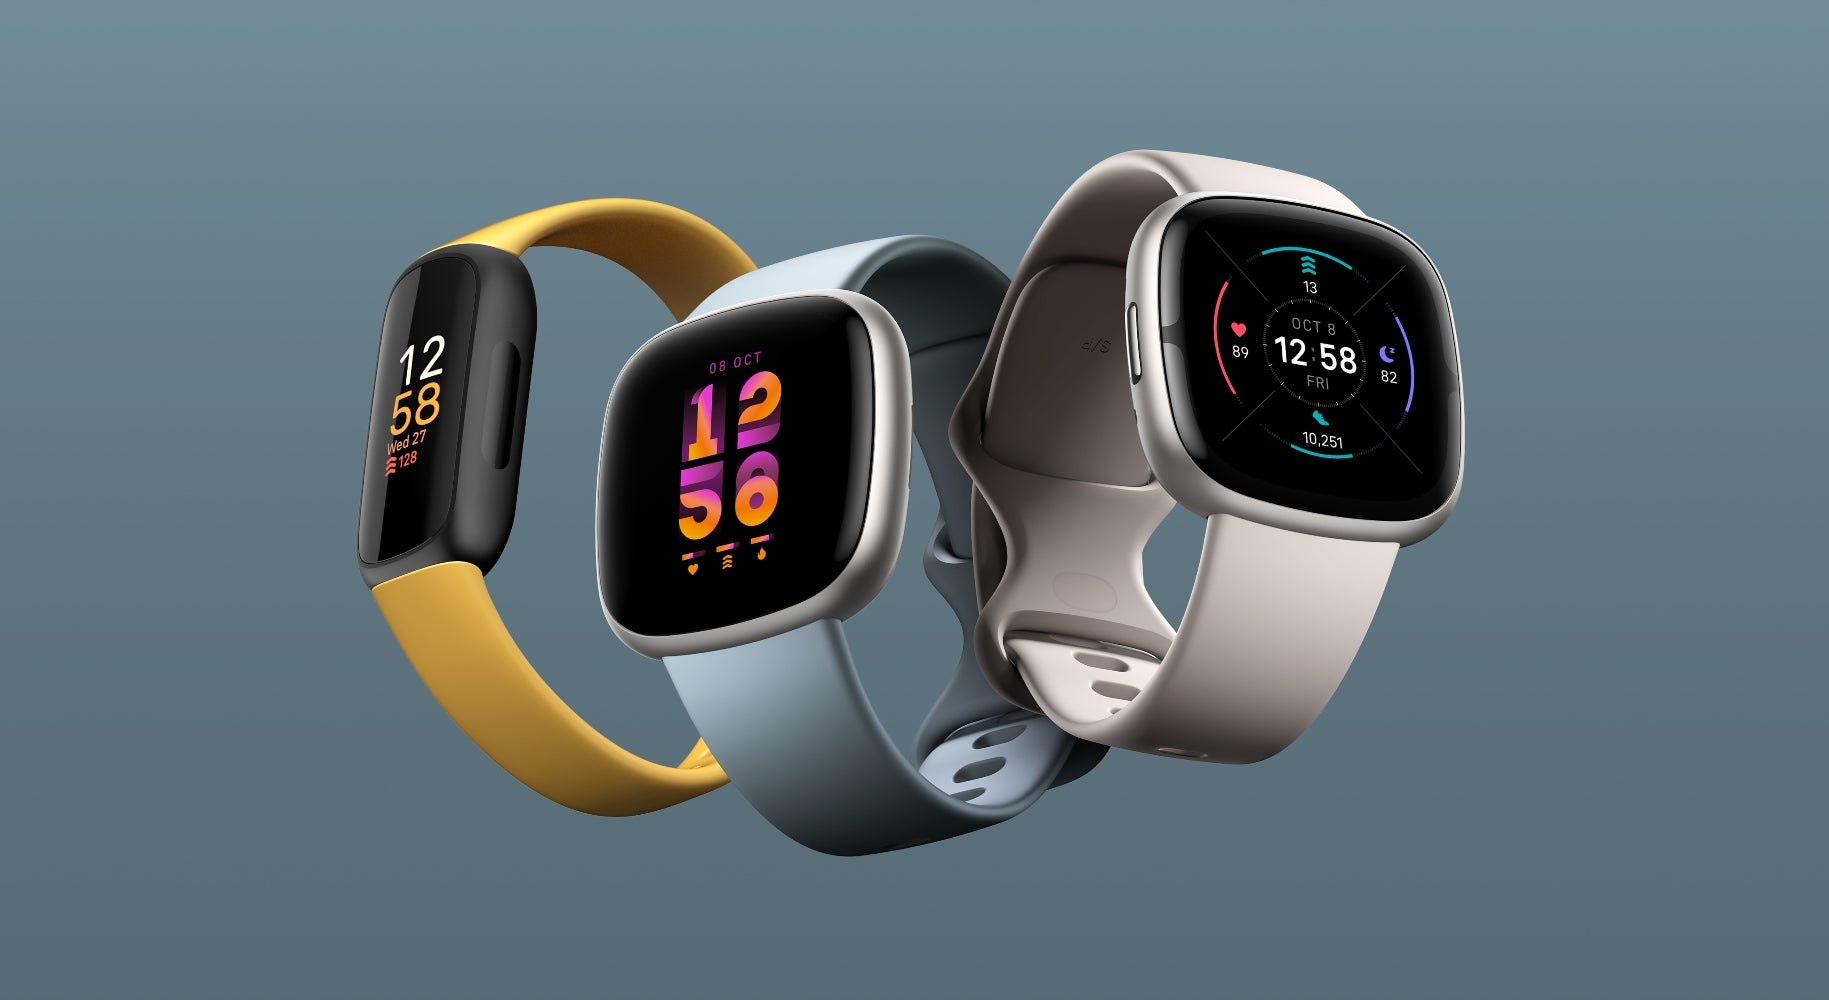 The Newest Fitbit Devices Look Real Good On The Wrist